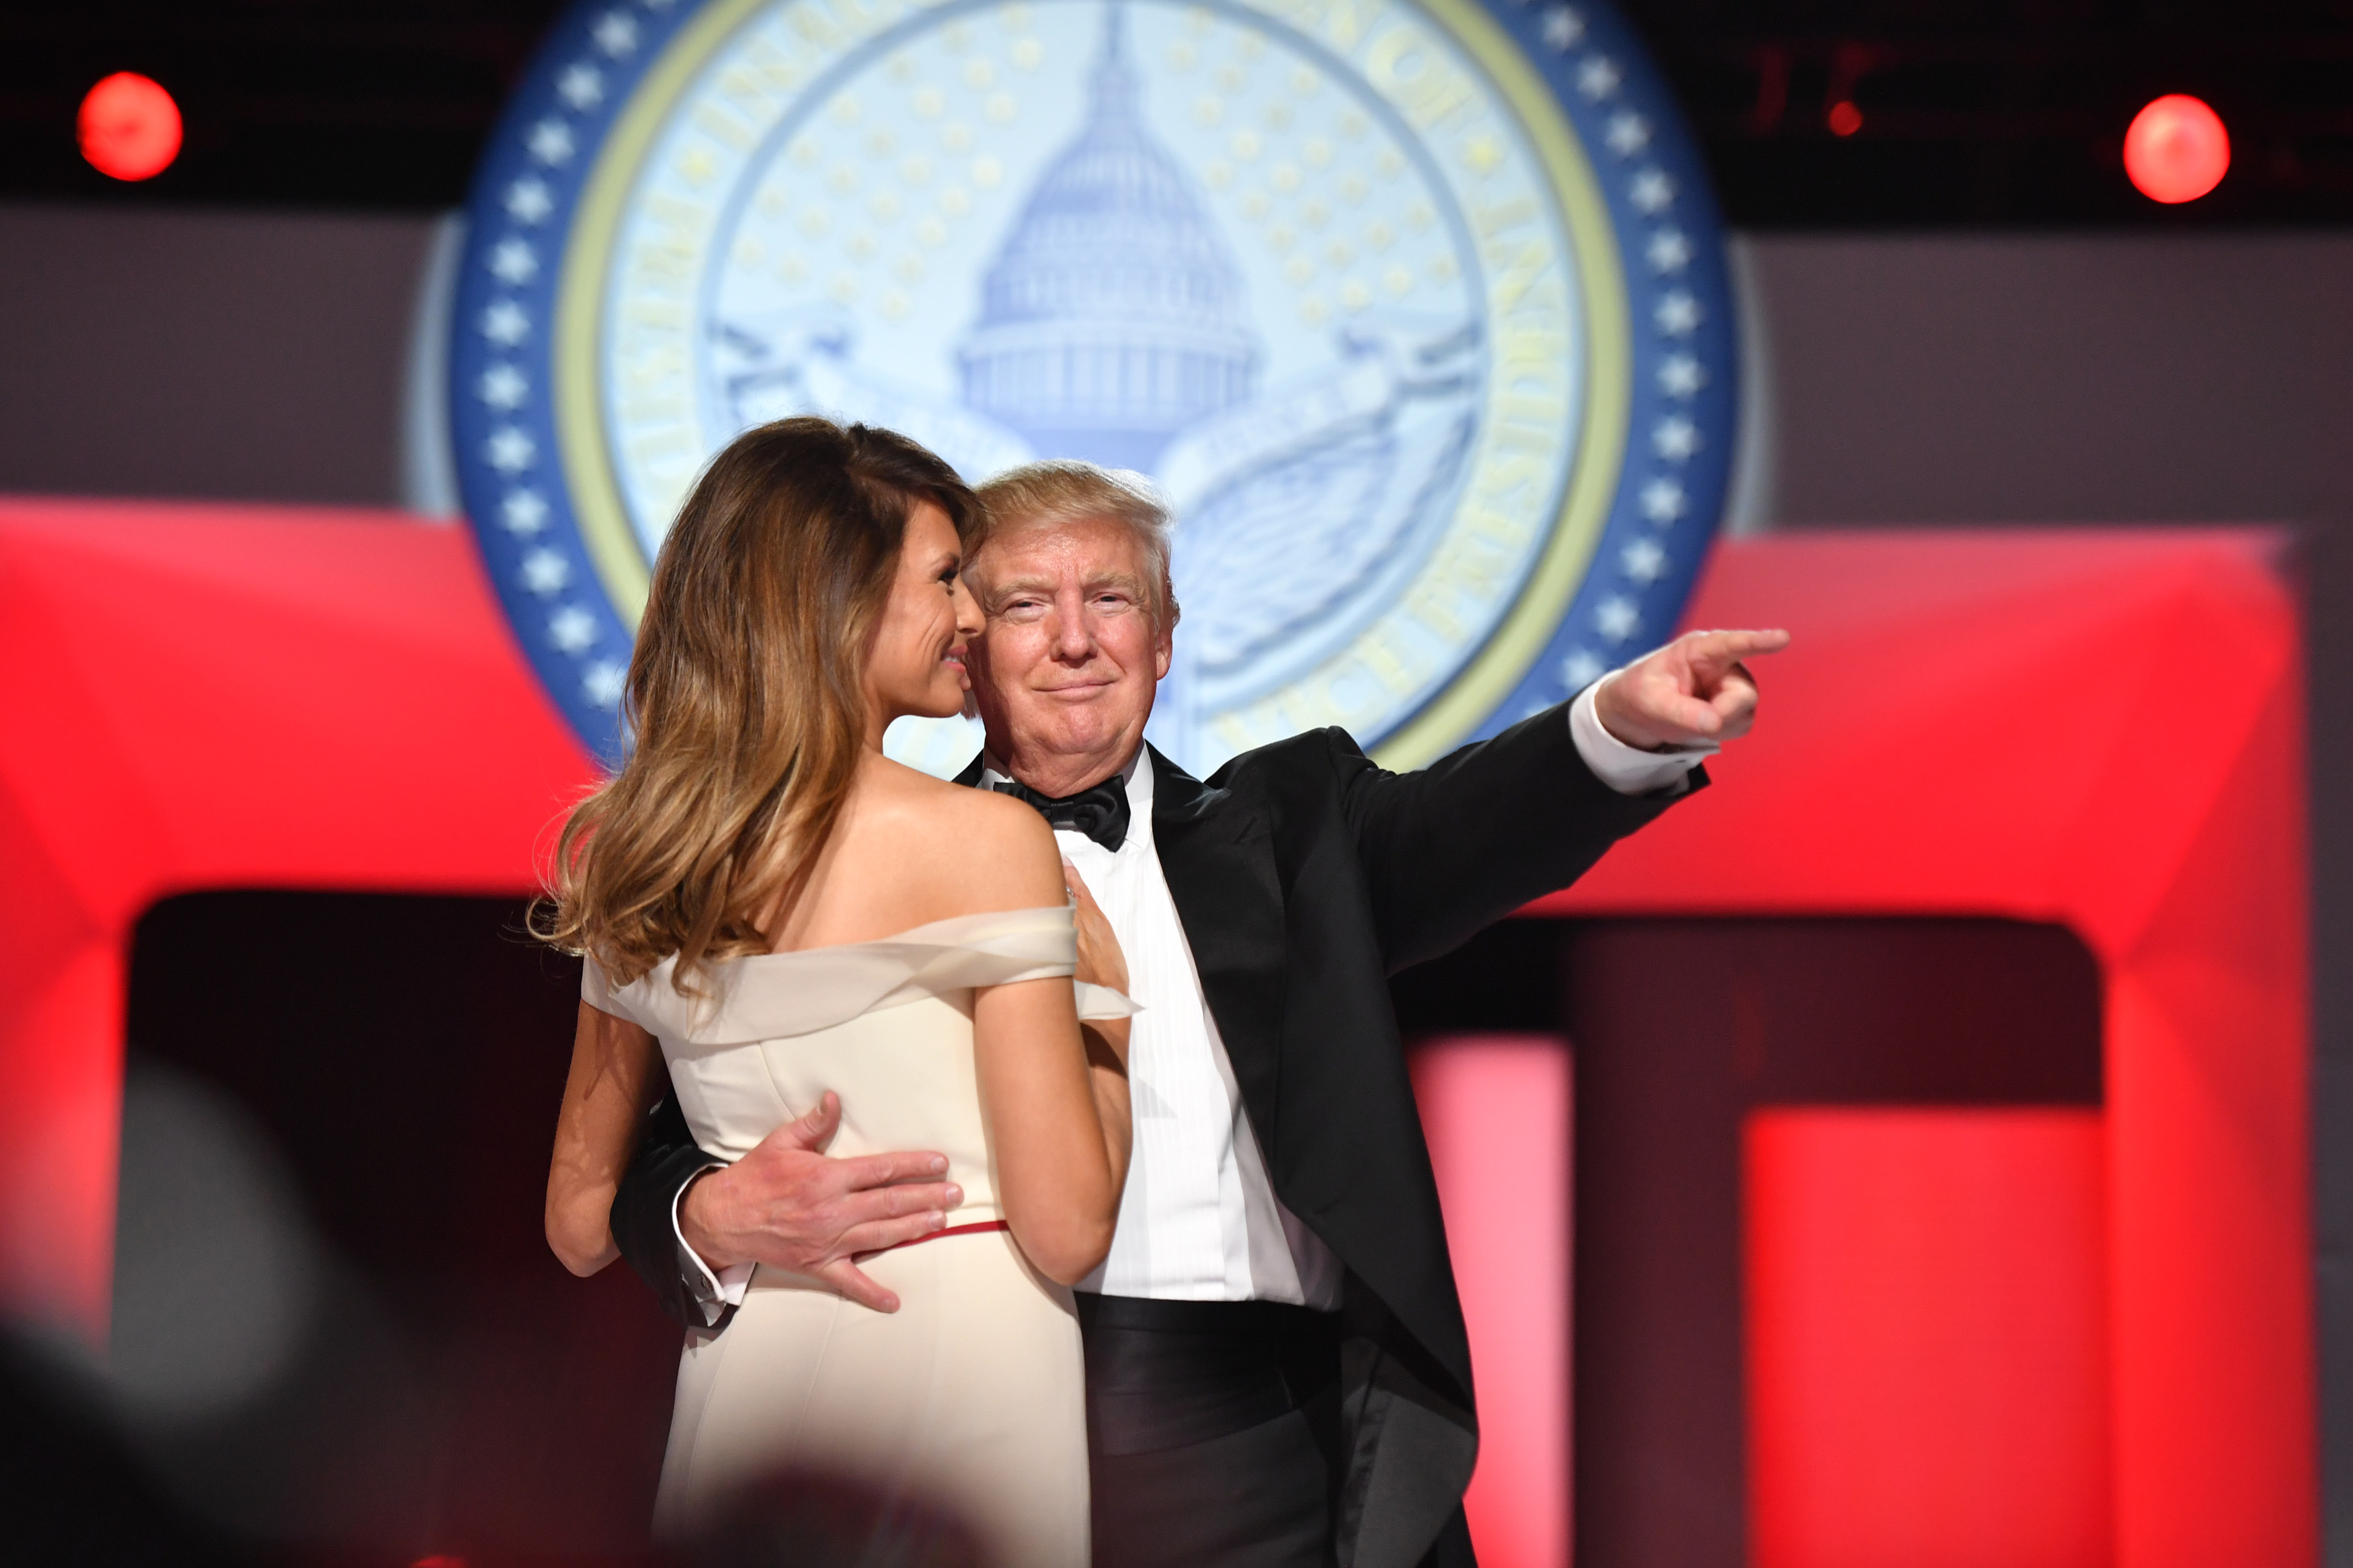 U.S. President Donald Trump, right, gestures as he dances with First Lady Melania Trump during the Freedom Ball in Washington, D.C., on Friday, Jan. 20, 2017. Senate Democrats and Republicans are tussling over how many of Trump's nominees can be confirmed on his first day in office, with Republicans threatening to work through the weekend to break the logjam. Photographer: Kevin Dietsch/Pool via Bloomberg